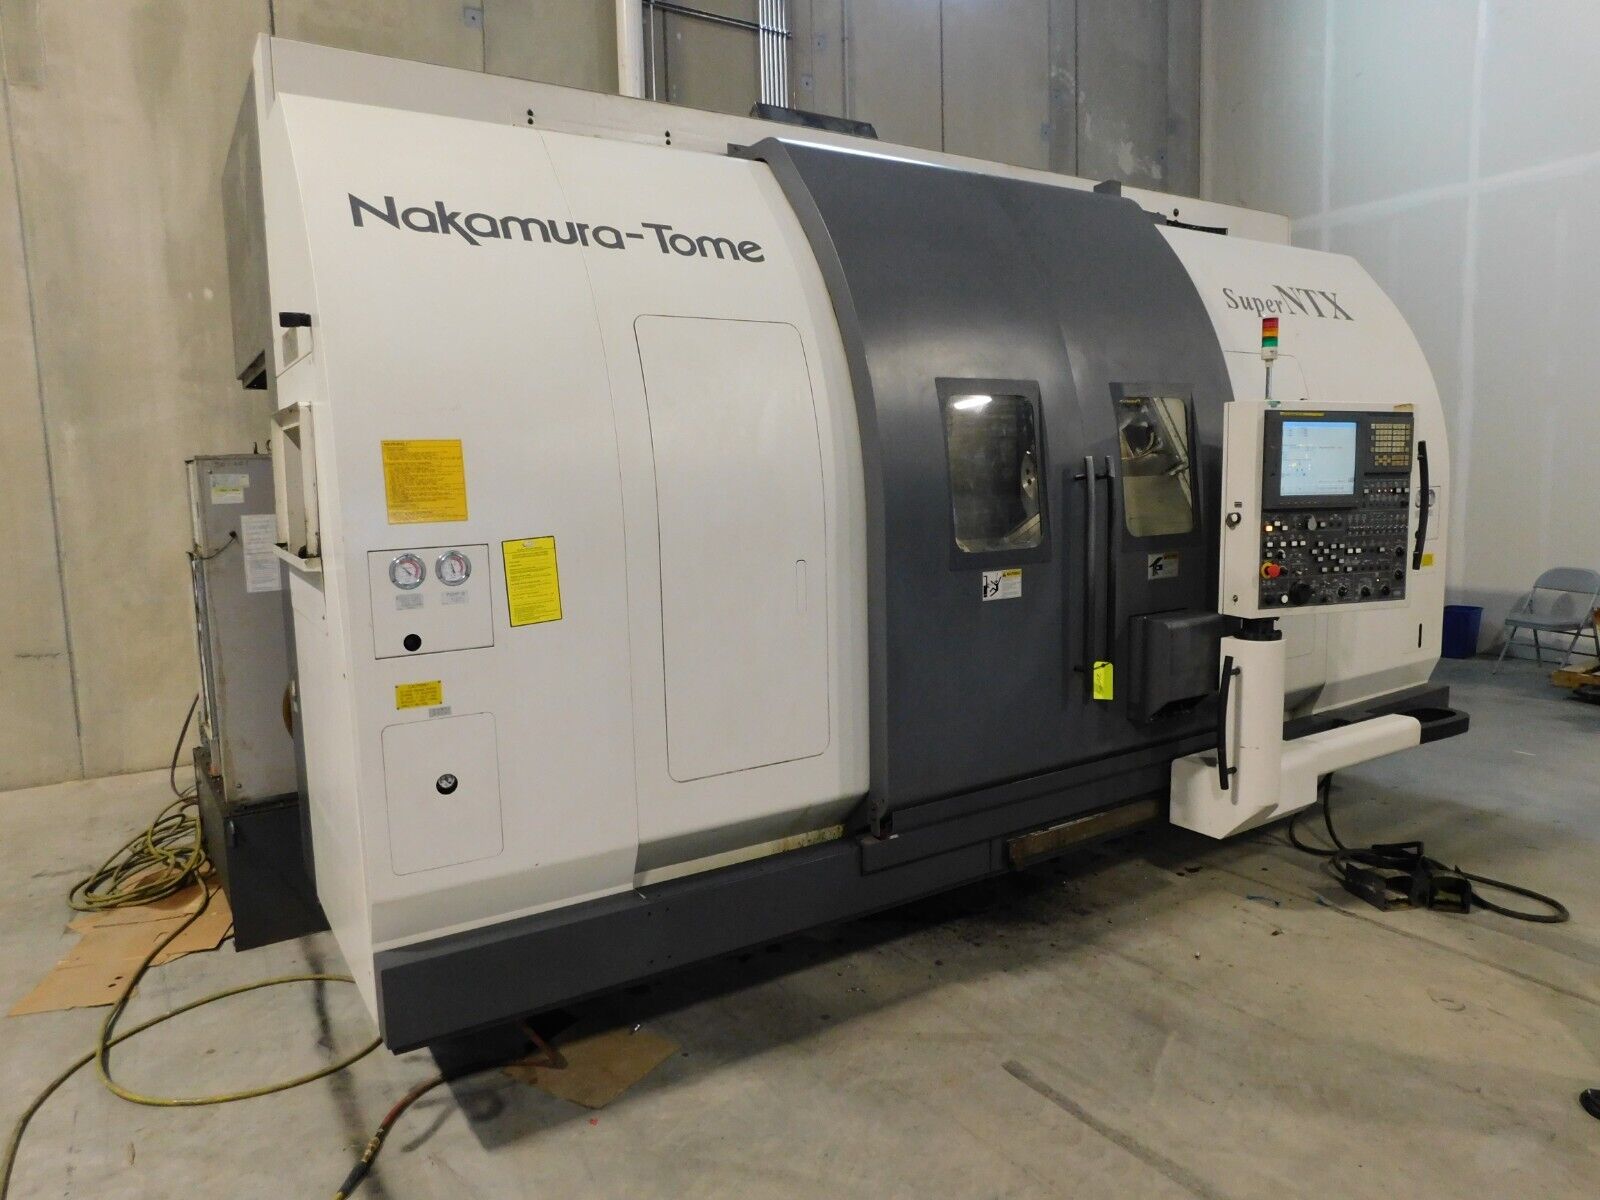 2008 NAKAMURA TOME SUPER NTX CNC MULTI TASK TWIN SPINDLE W/ B AXIS LOWER TURRRET